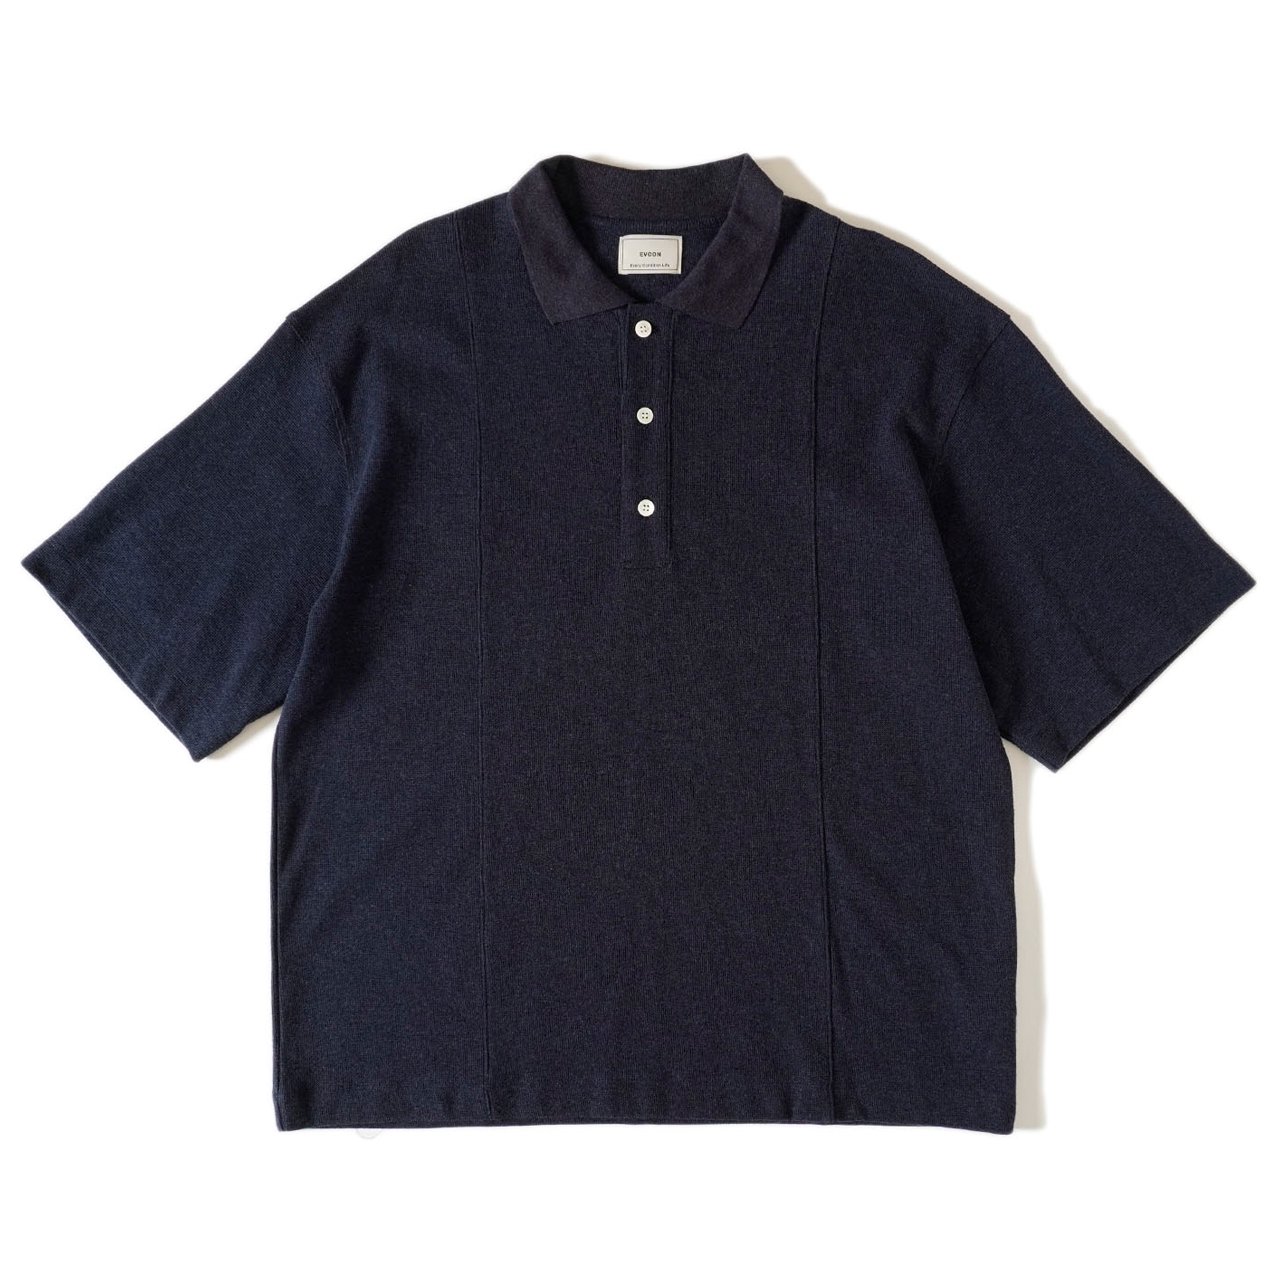 <img class='new_mark_img1' src='https://img.shop-pro.jp/img/new/icons5.gif' style='border:none;display:inline;margin:0px;padding:0px;width:auto;' />EVCON (ӥ)COTTON KNIT SHORT SLEEVE POLO SHIRTS NAVY